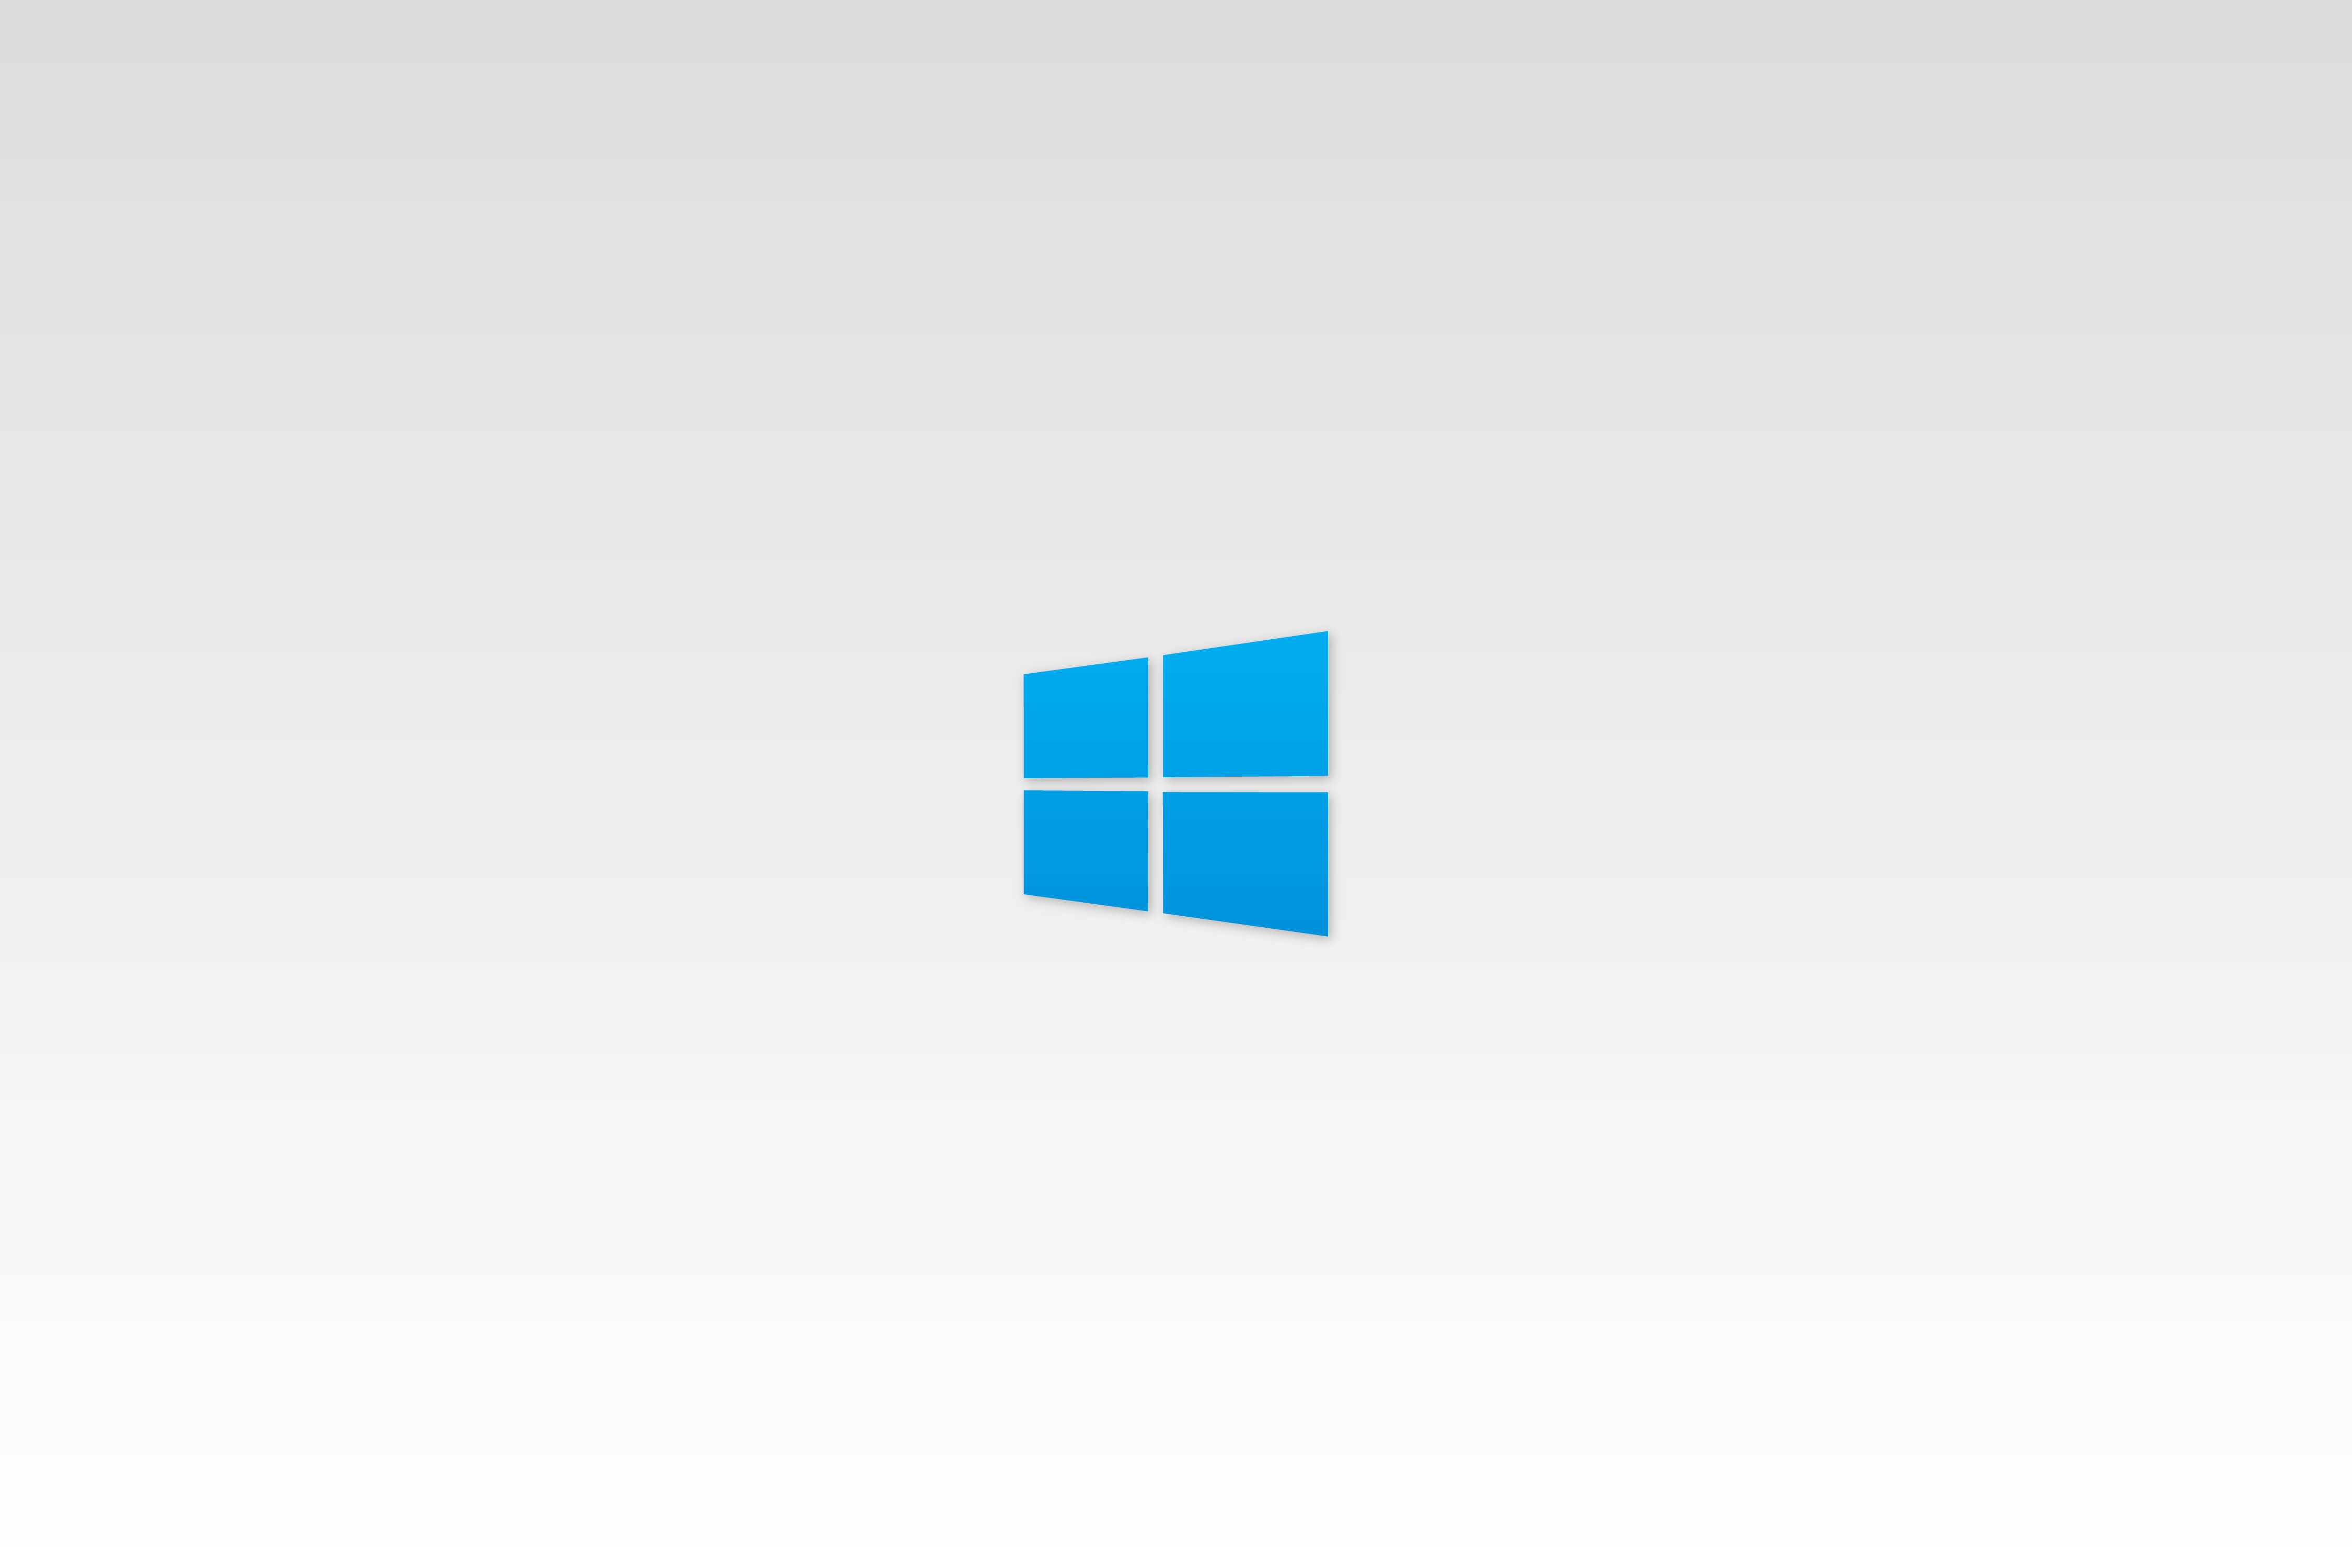 Simple Windows Wallpapers - Top Free Simple Windows Backgrounds